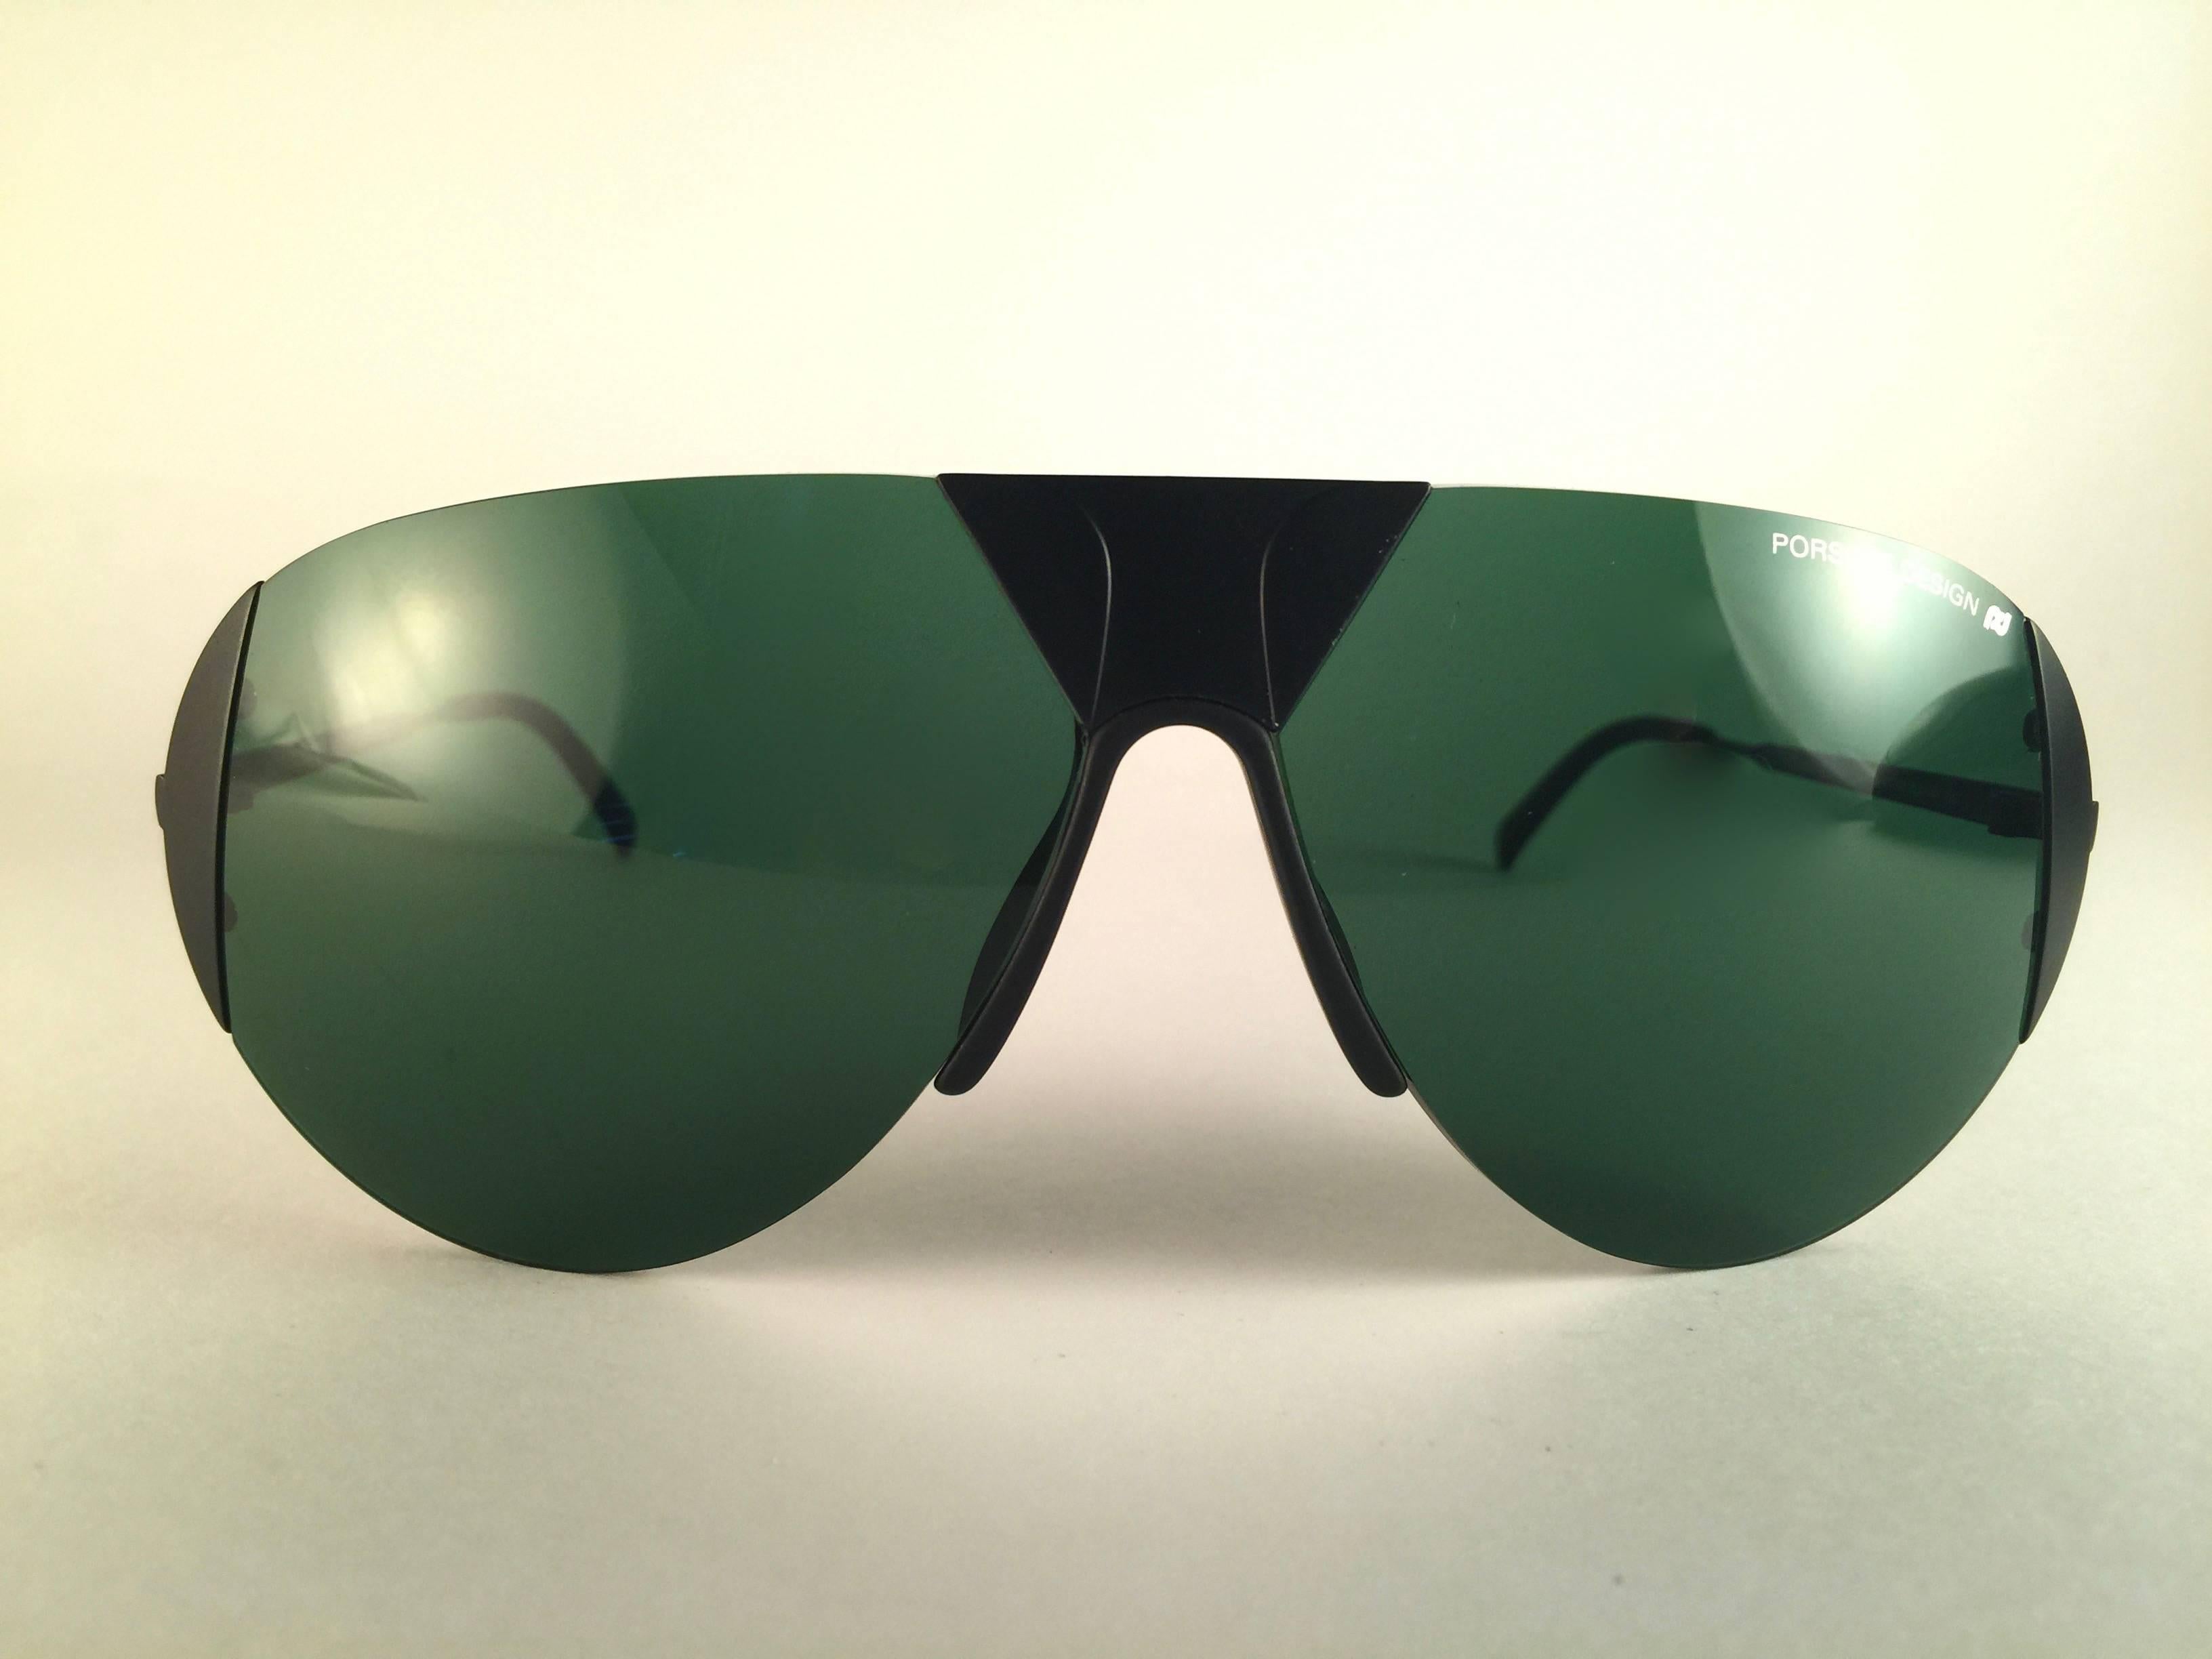 Rare Item.

New 1980's Porsche Design 5636 Black matte frame with deep green lenses.  Amazing craftsmanship and quality.  
Comes with the original Porsche hard case thats has some wear on it due to nearly 40 years of storage.  
New, never worn. Made